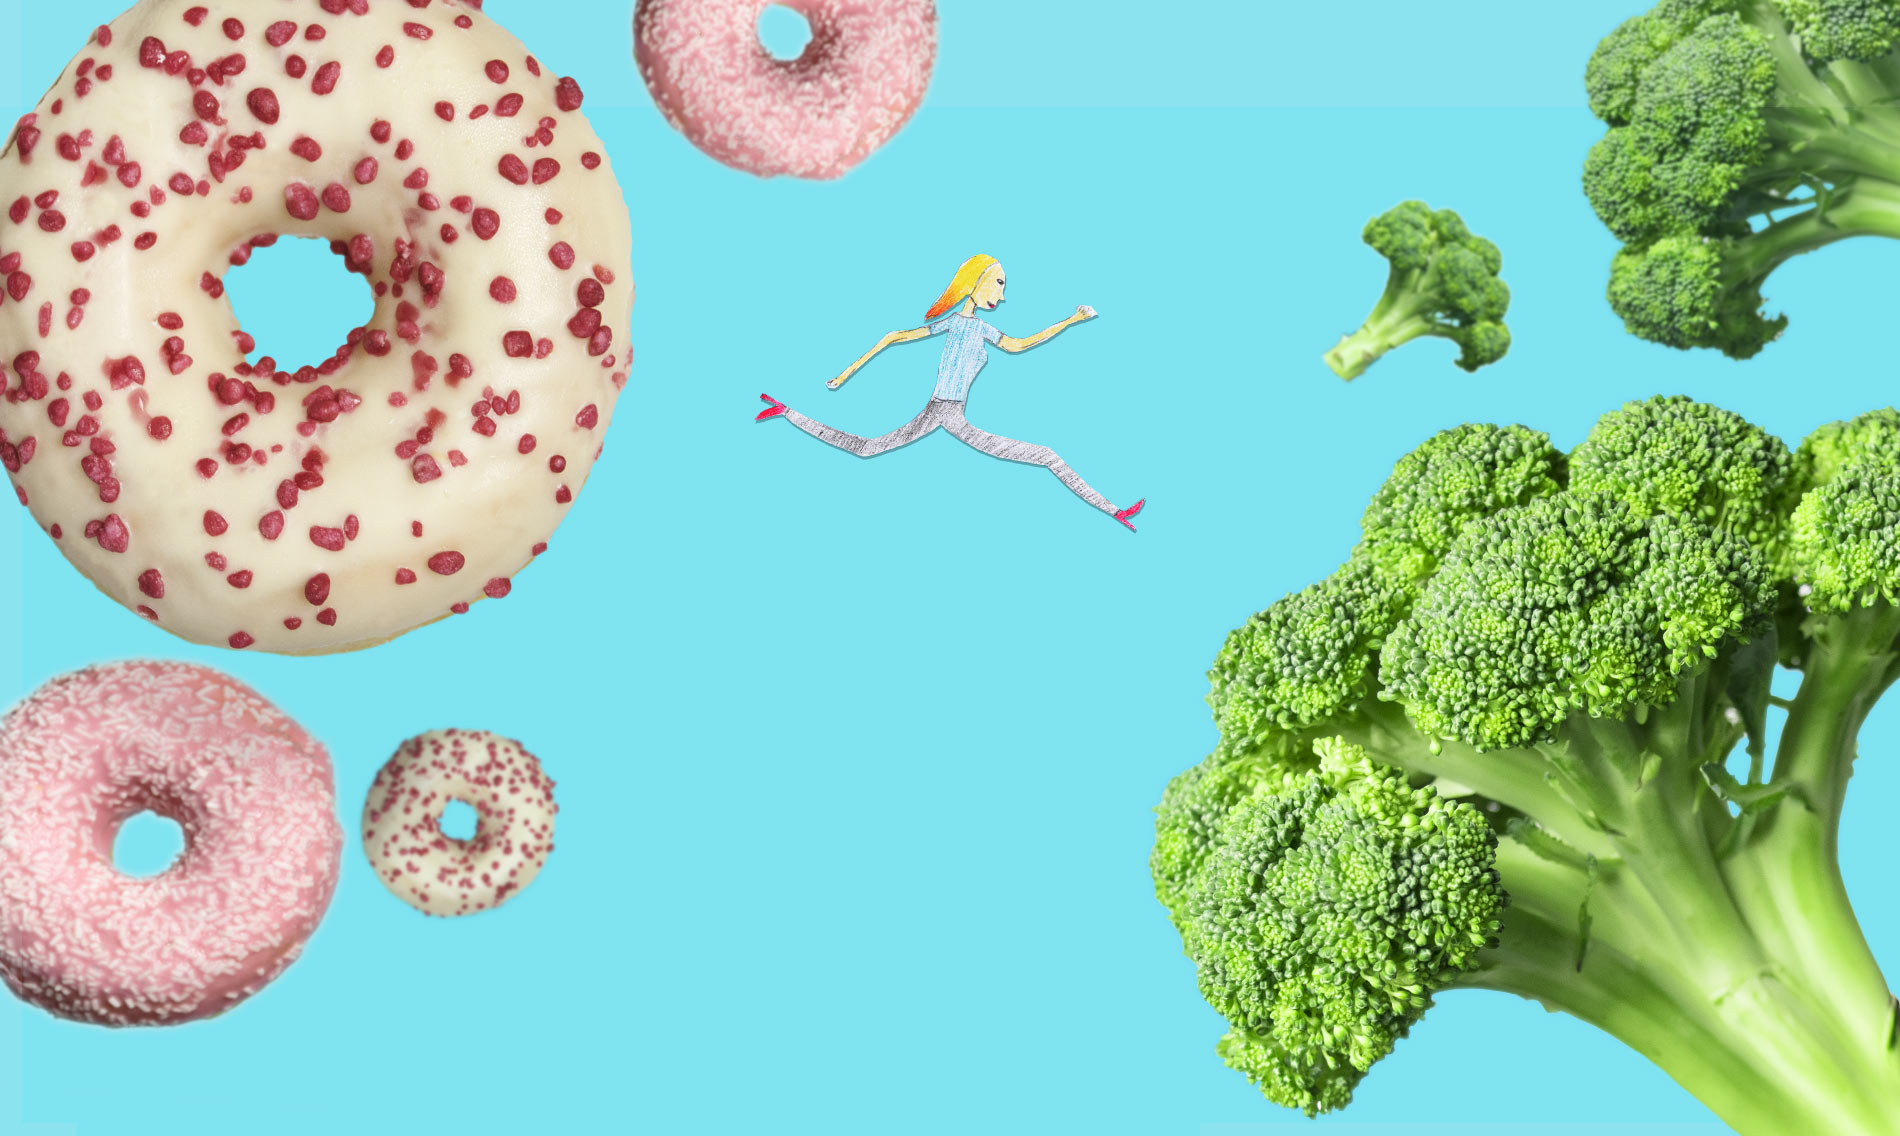 A collage of a colourful pencil drawing of a woman leaping between a photographed doughnut and a photographed head of broccoli